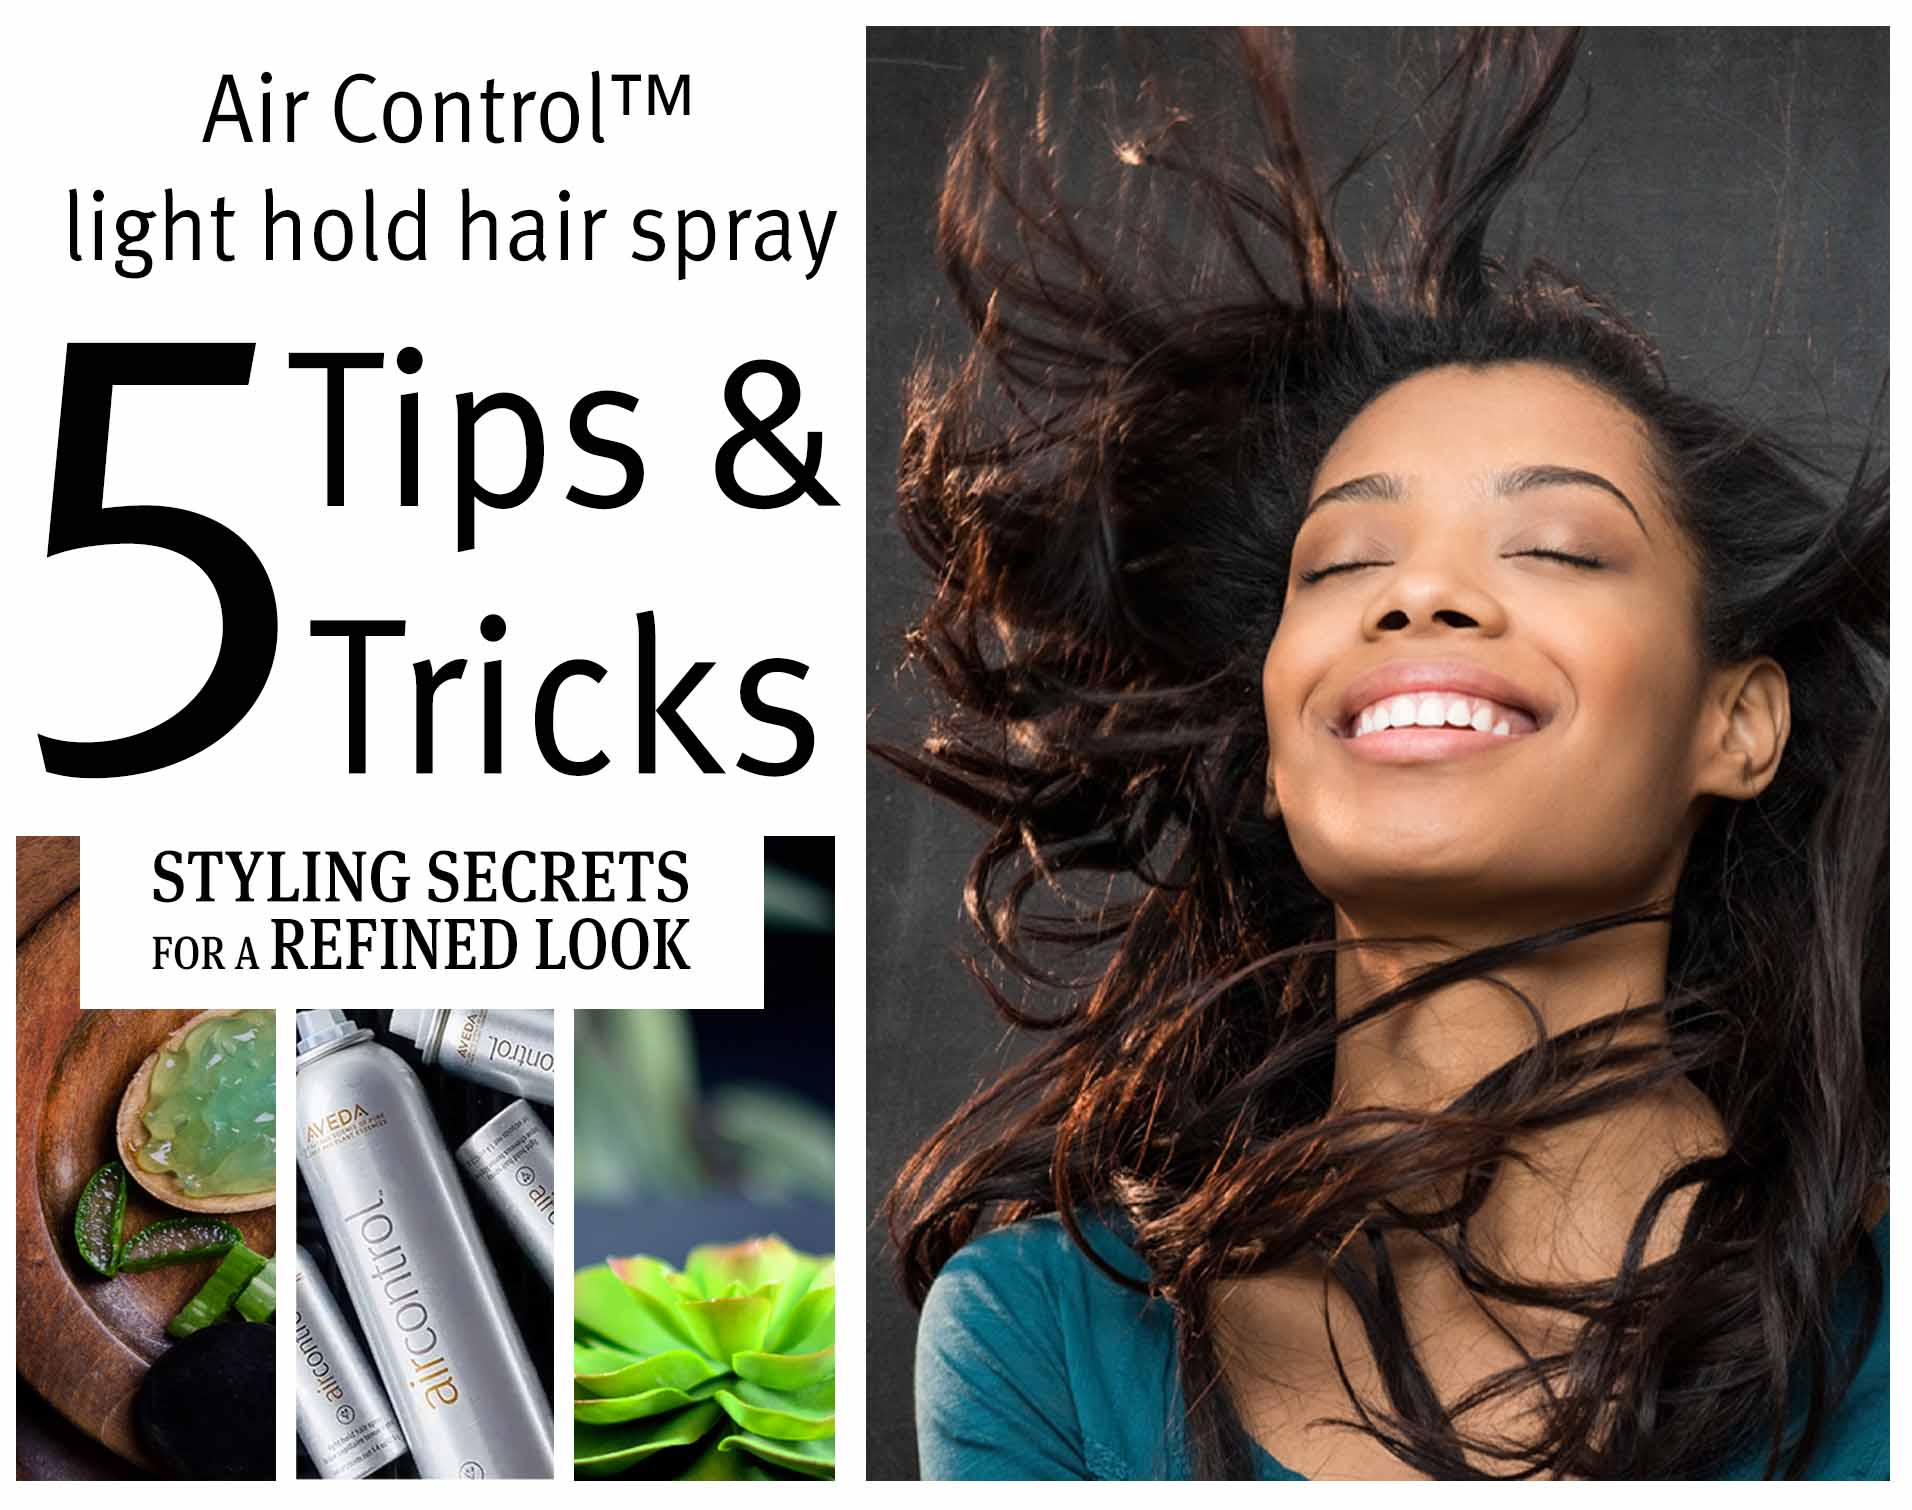 Image of a woman flipping her with hair and images air control with tips and tricks with a